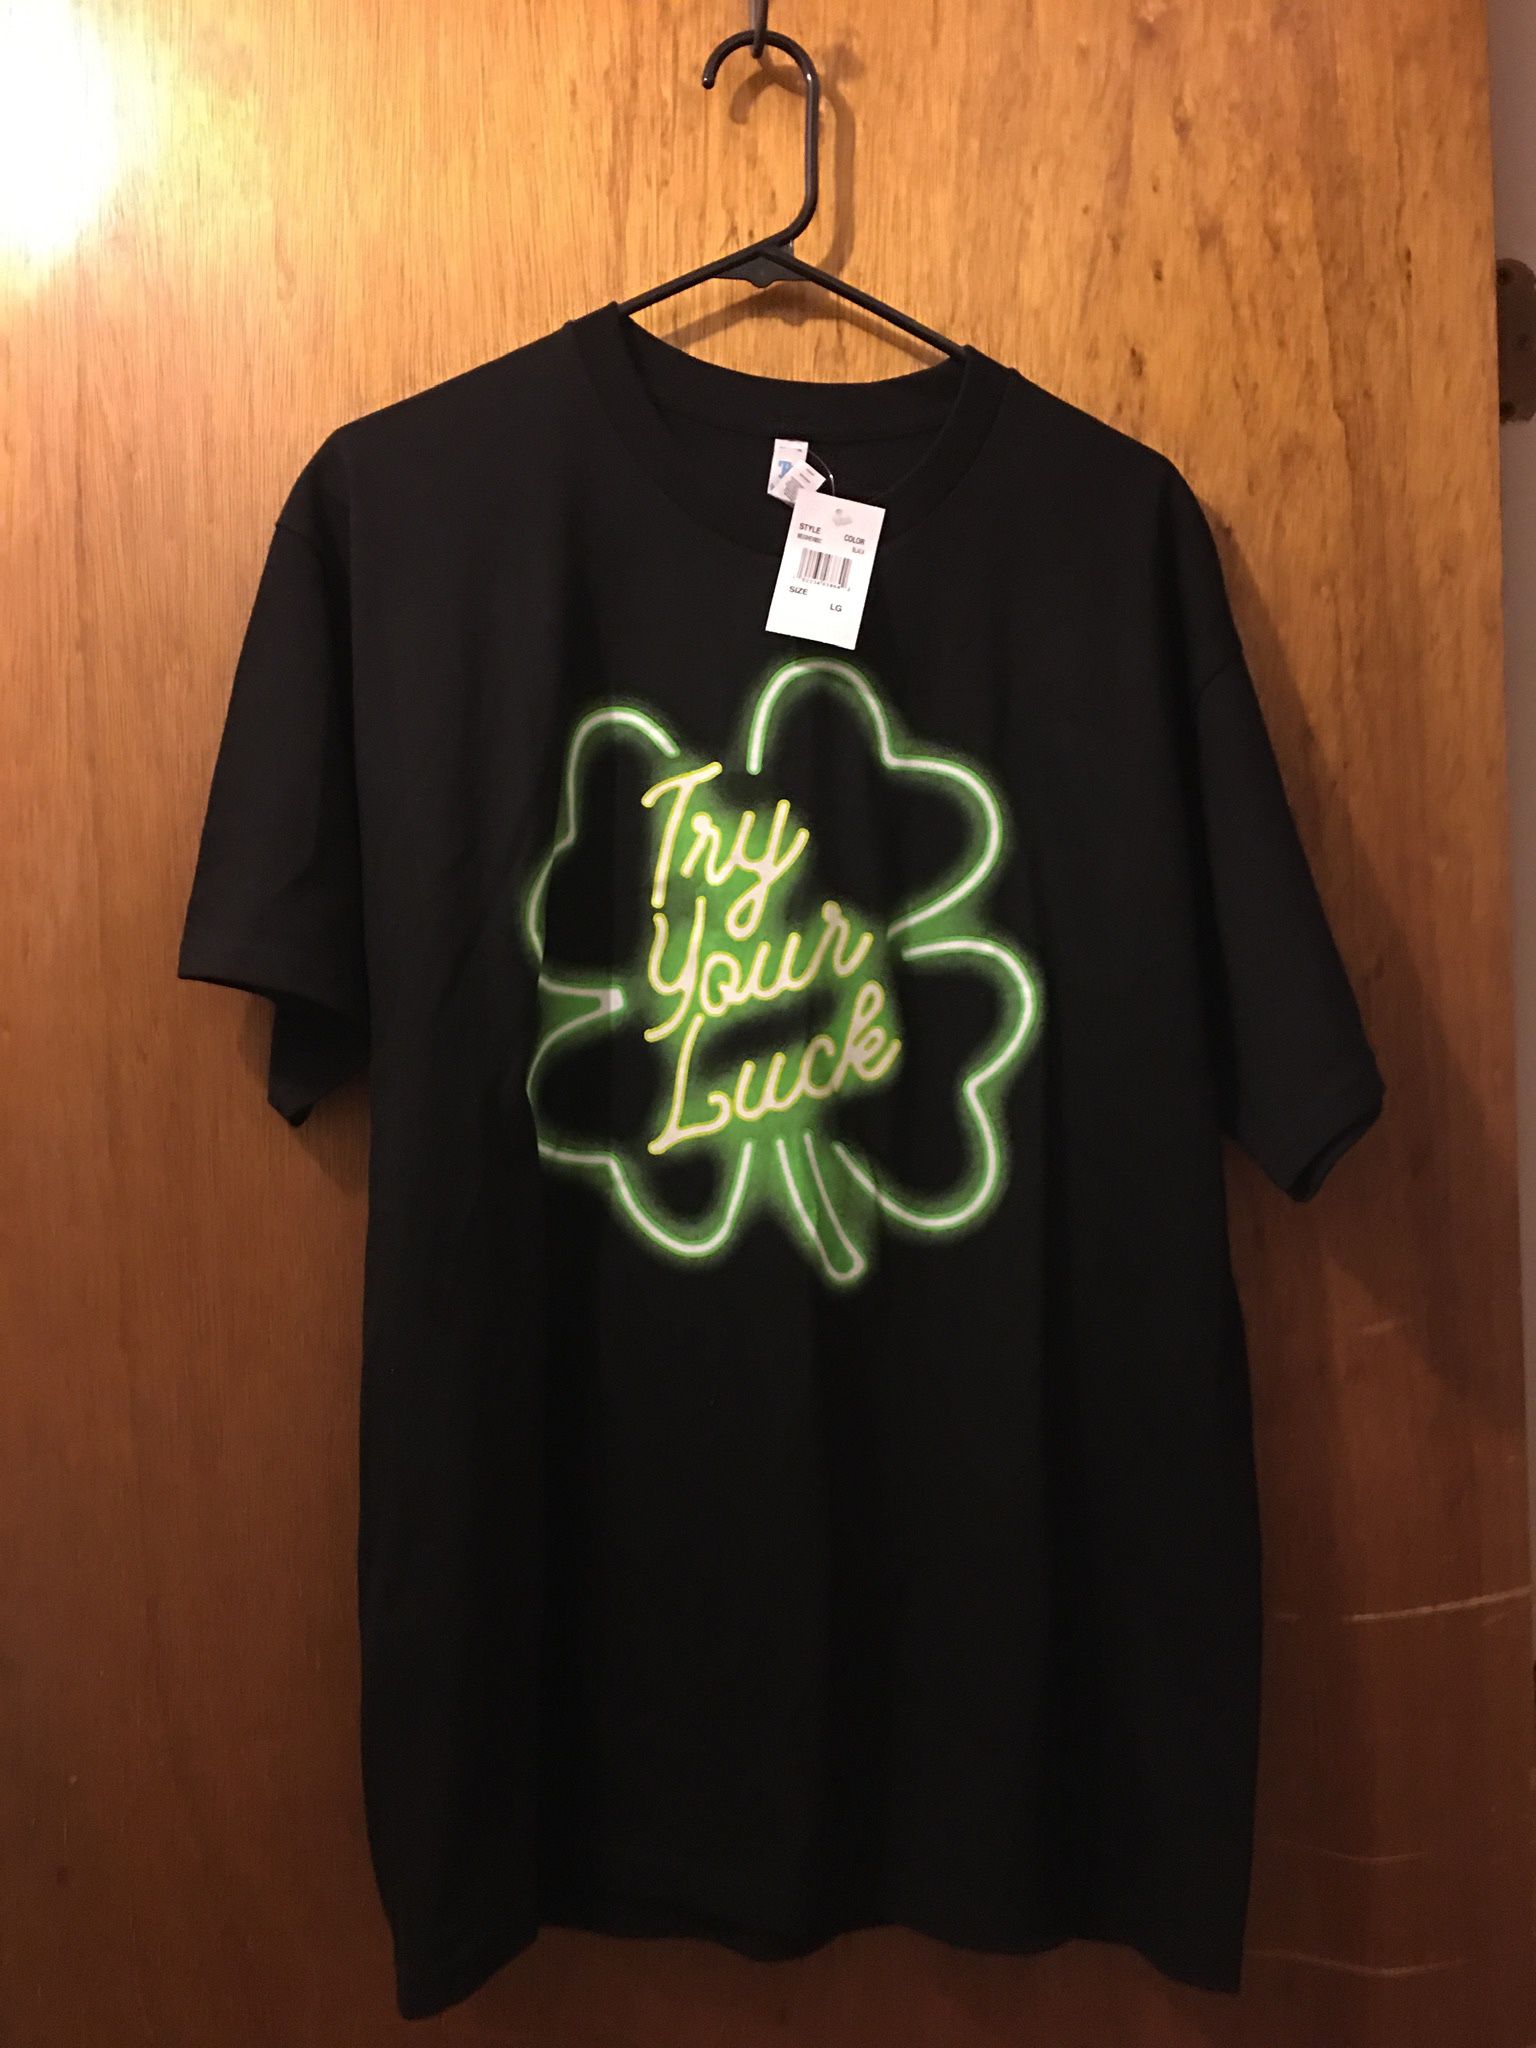 Y Shirt “Try Your Luck”